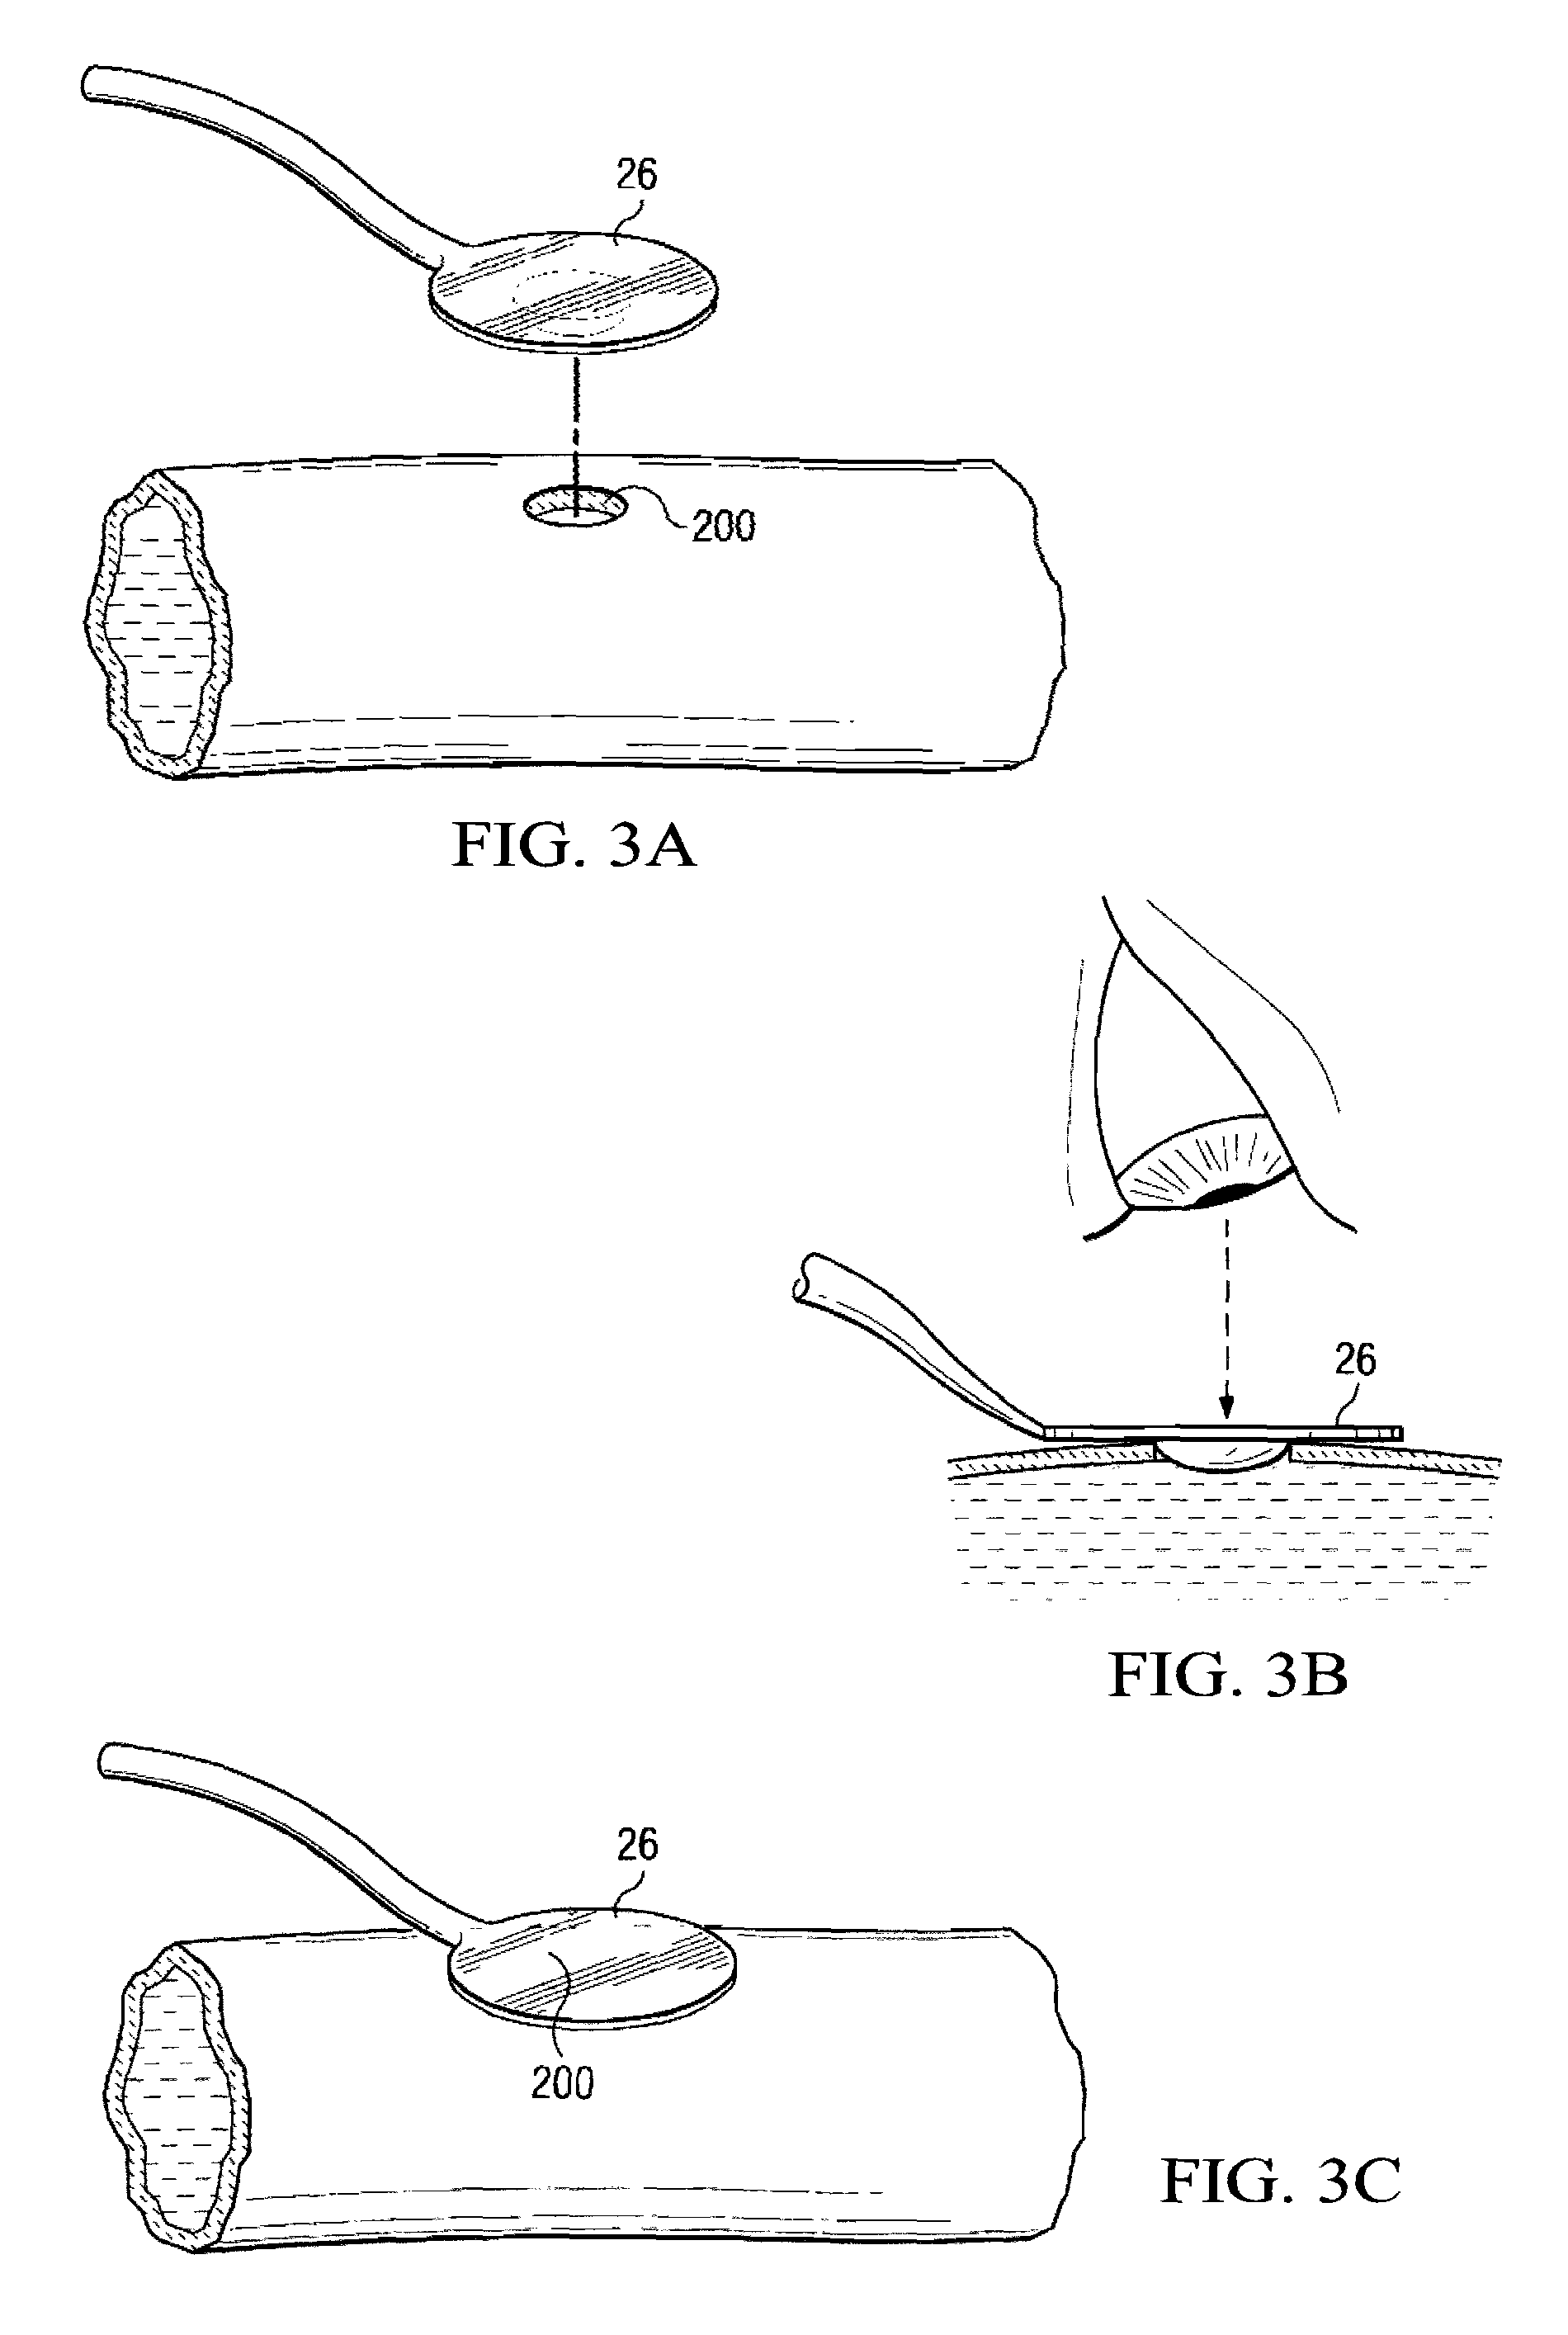 System and Method for Providing a Coil Element in a Vascular Environment